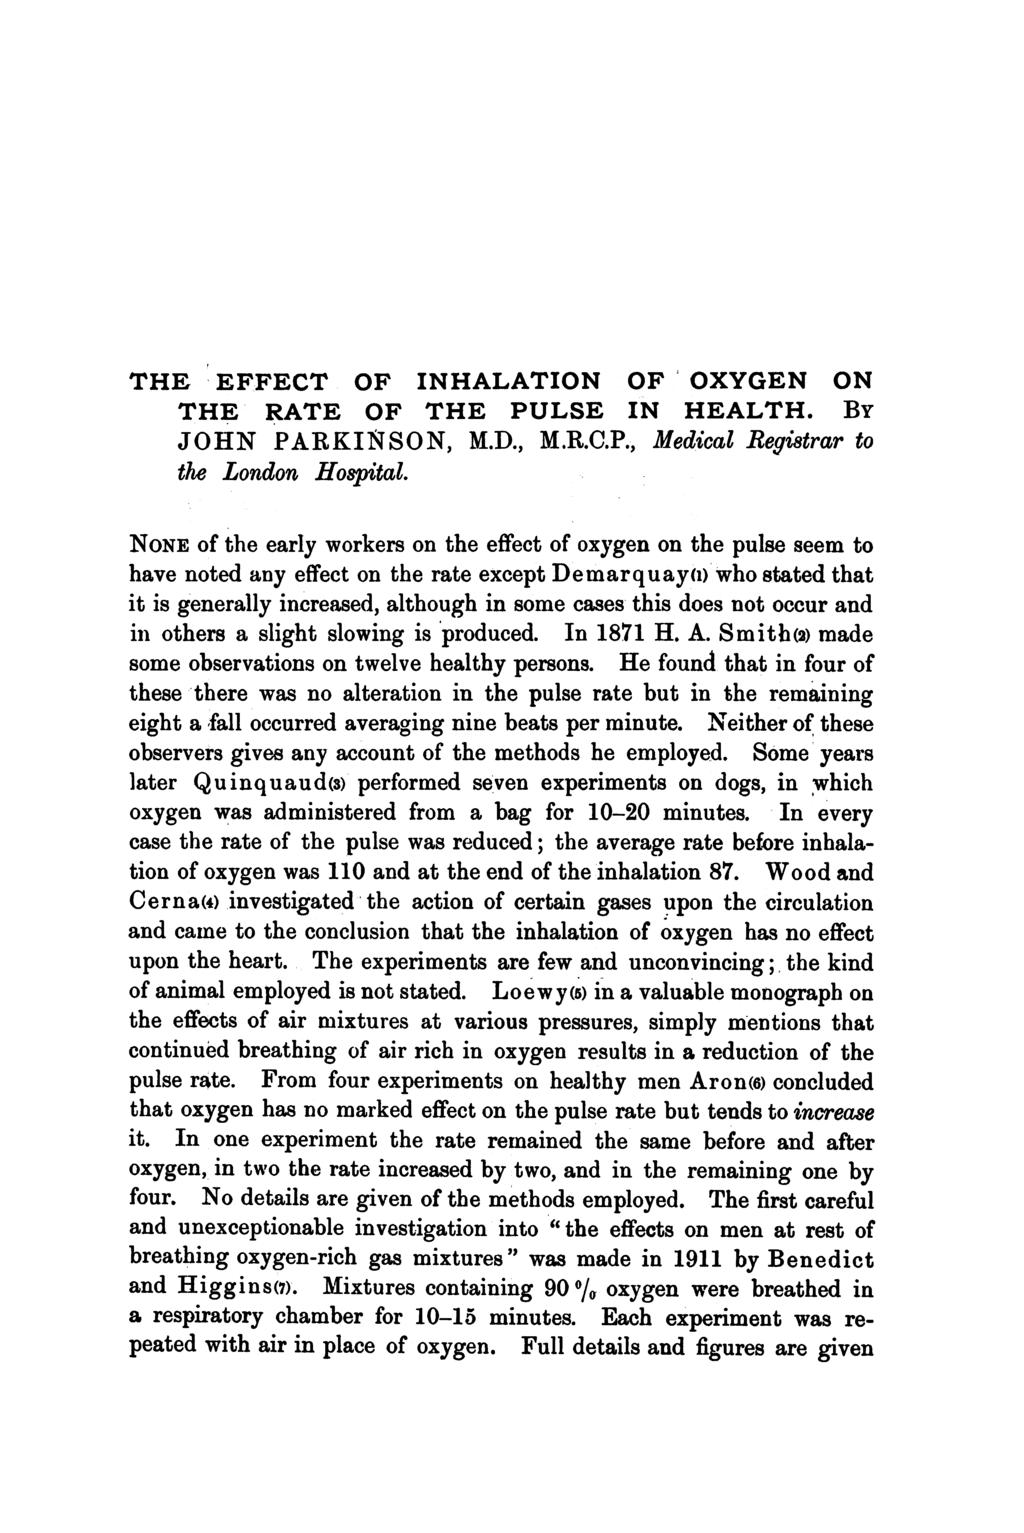 THE; EFFECT OF INHALATION OF OXYGEN ON THE RATE OF THE PULSE IN HEALTH. BY JOHN PARKINSON, M.D., M.R.C.P., Medical Registrar to the London Hospital.